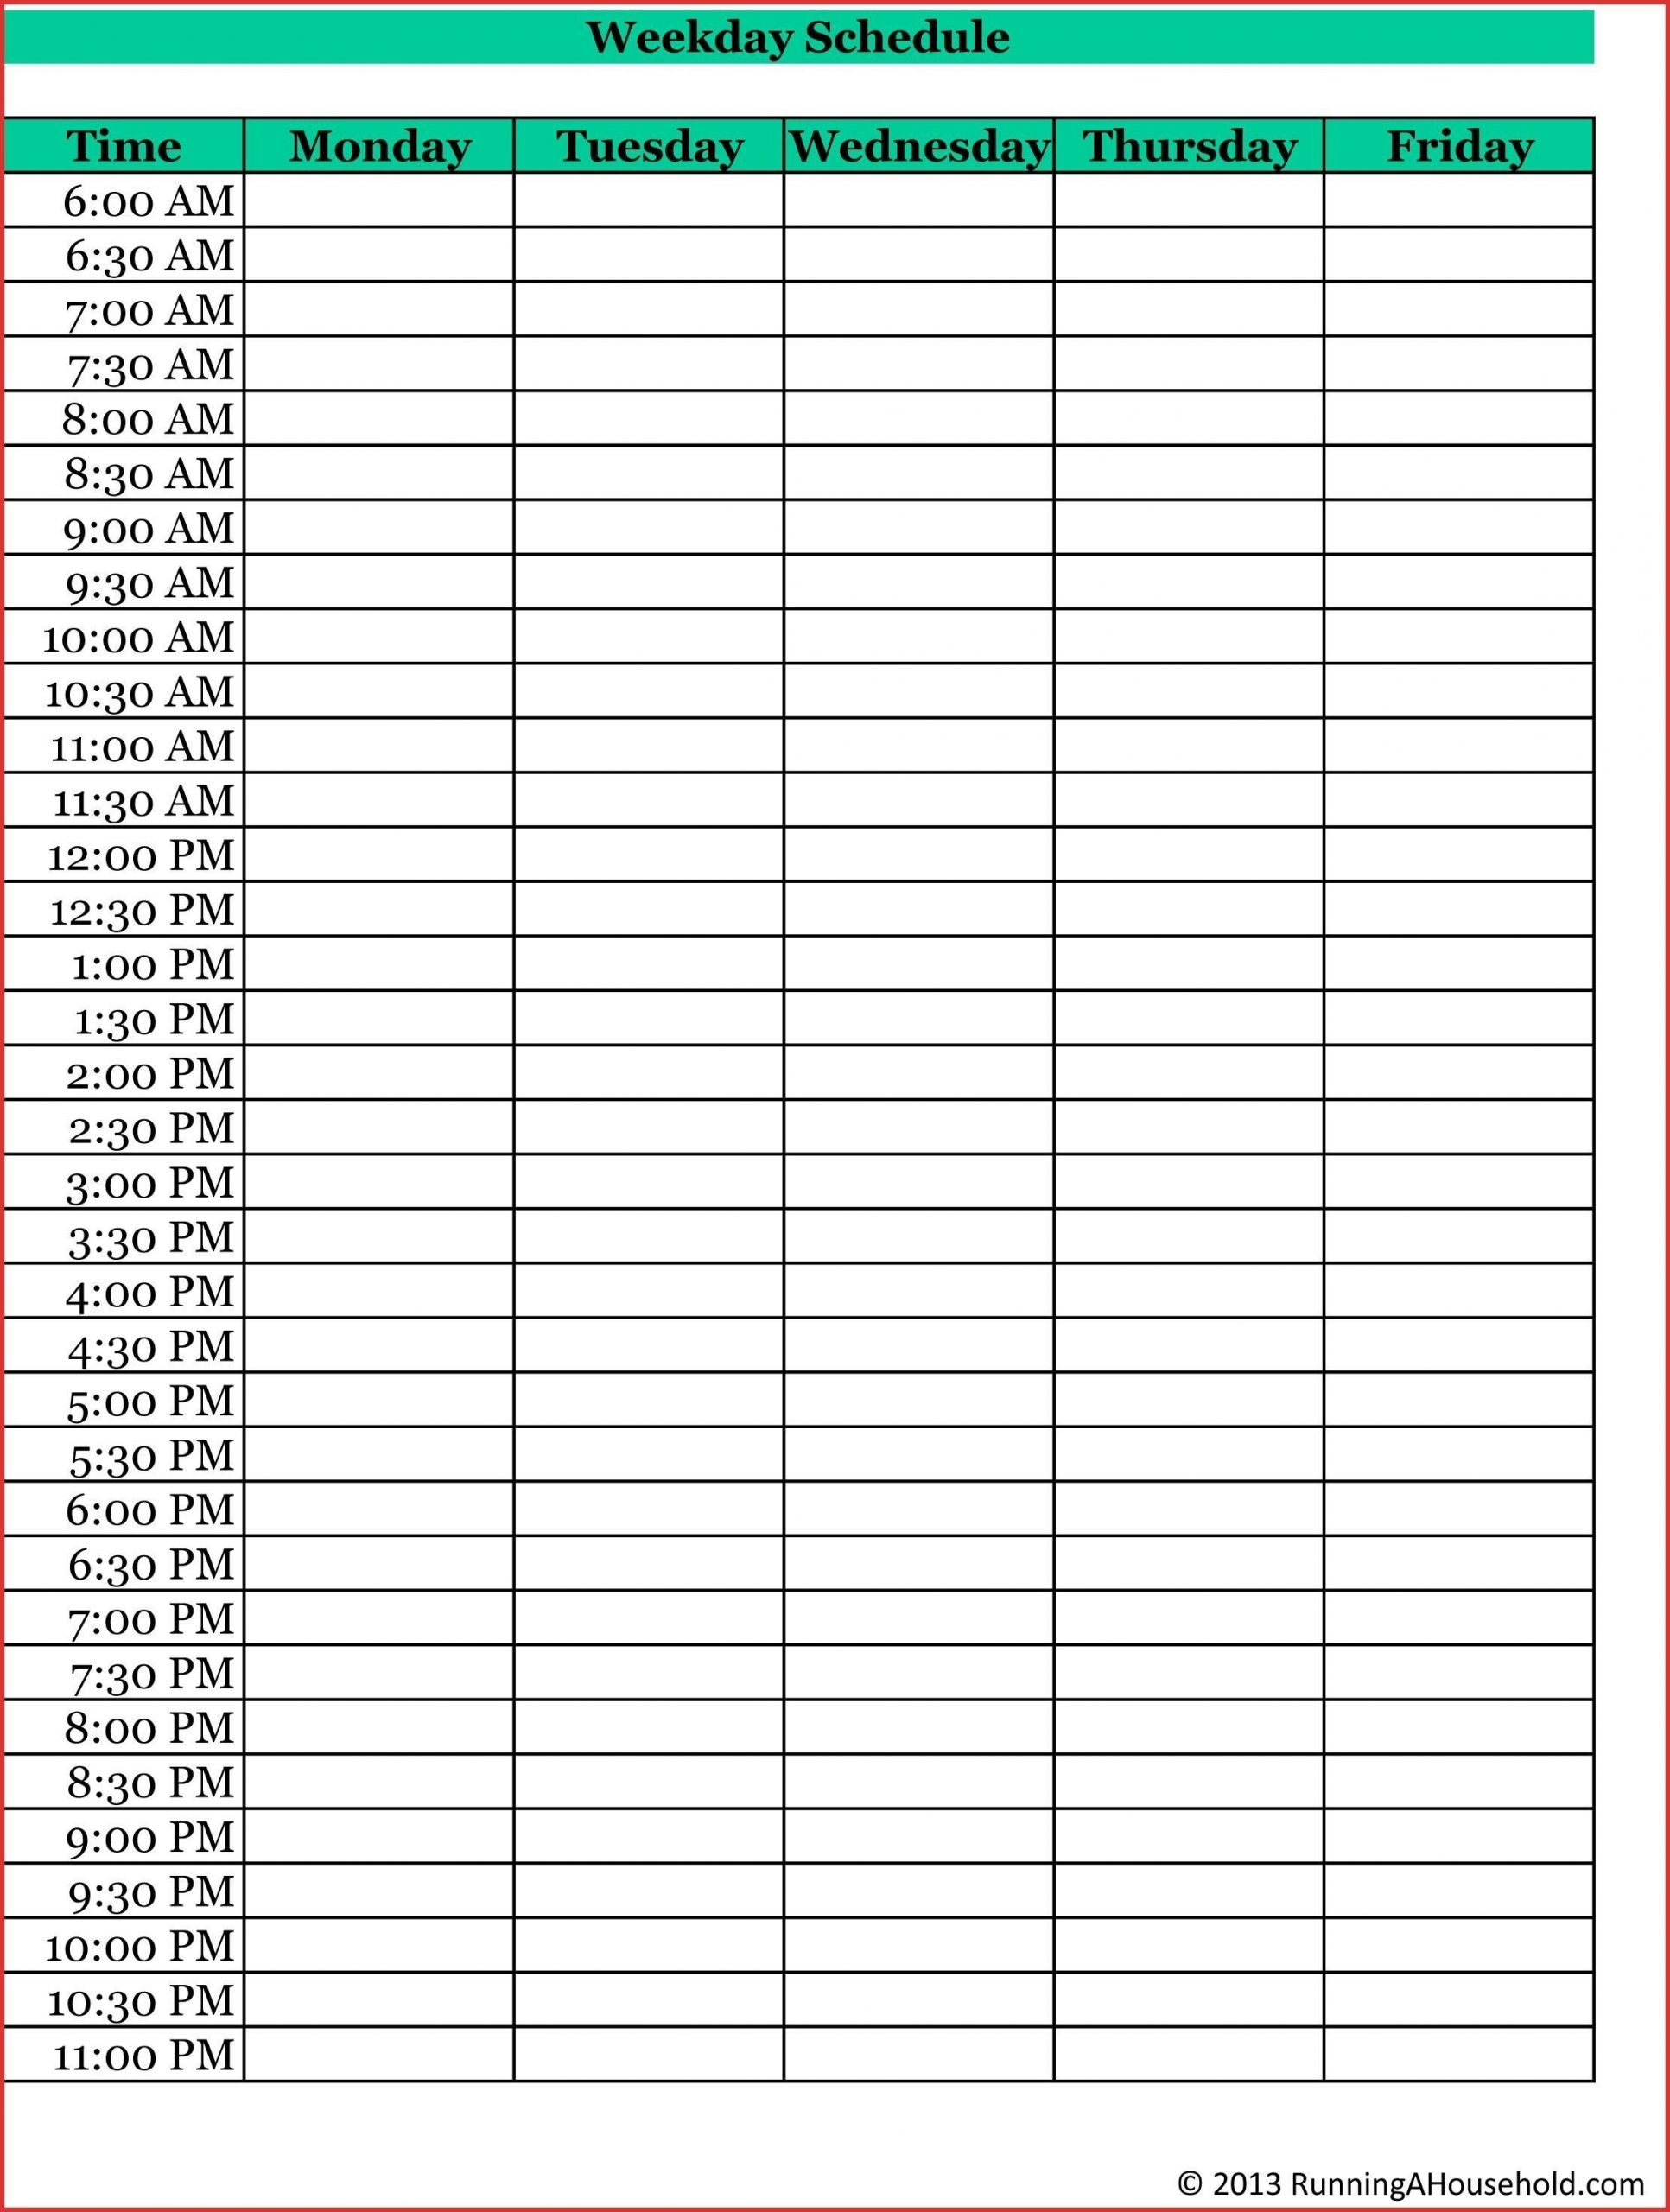 Take Excel Weekly Calendar Monday With 15 Min Increments